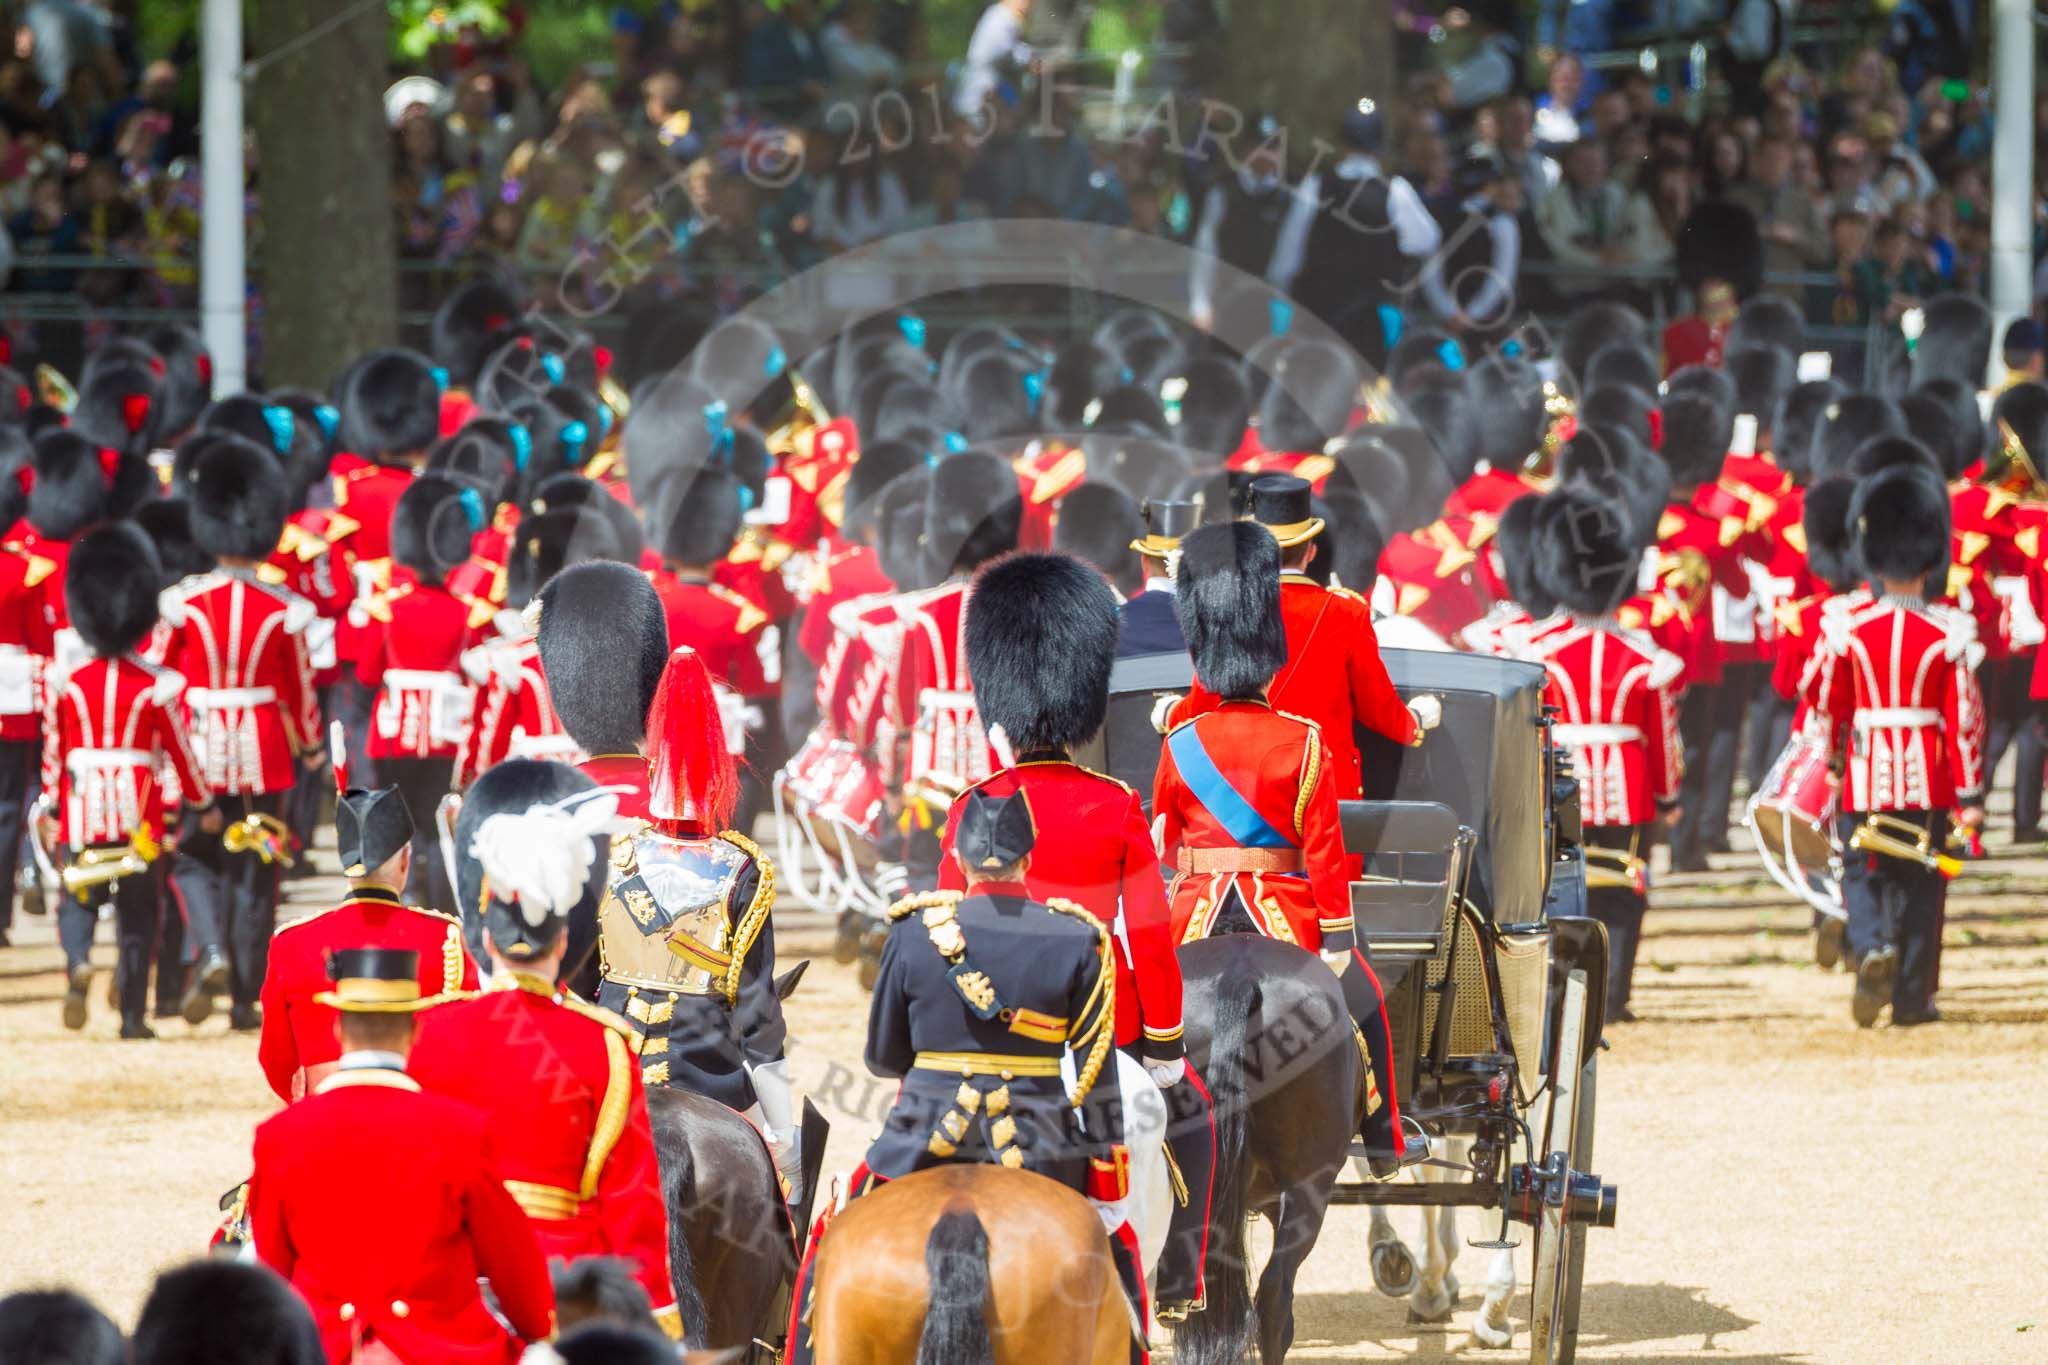 The Colonel's Review 2015.
Horse Guards Parade, Westminster,
London,

United Kingdom,
on 06 June 2015 at 12:09, image #589